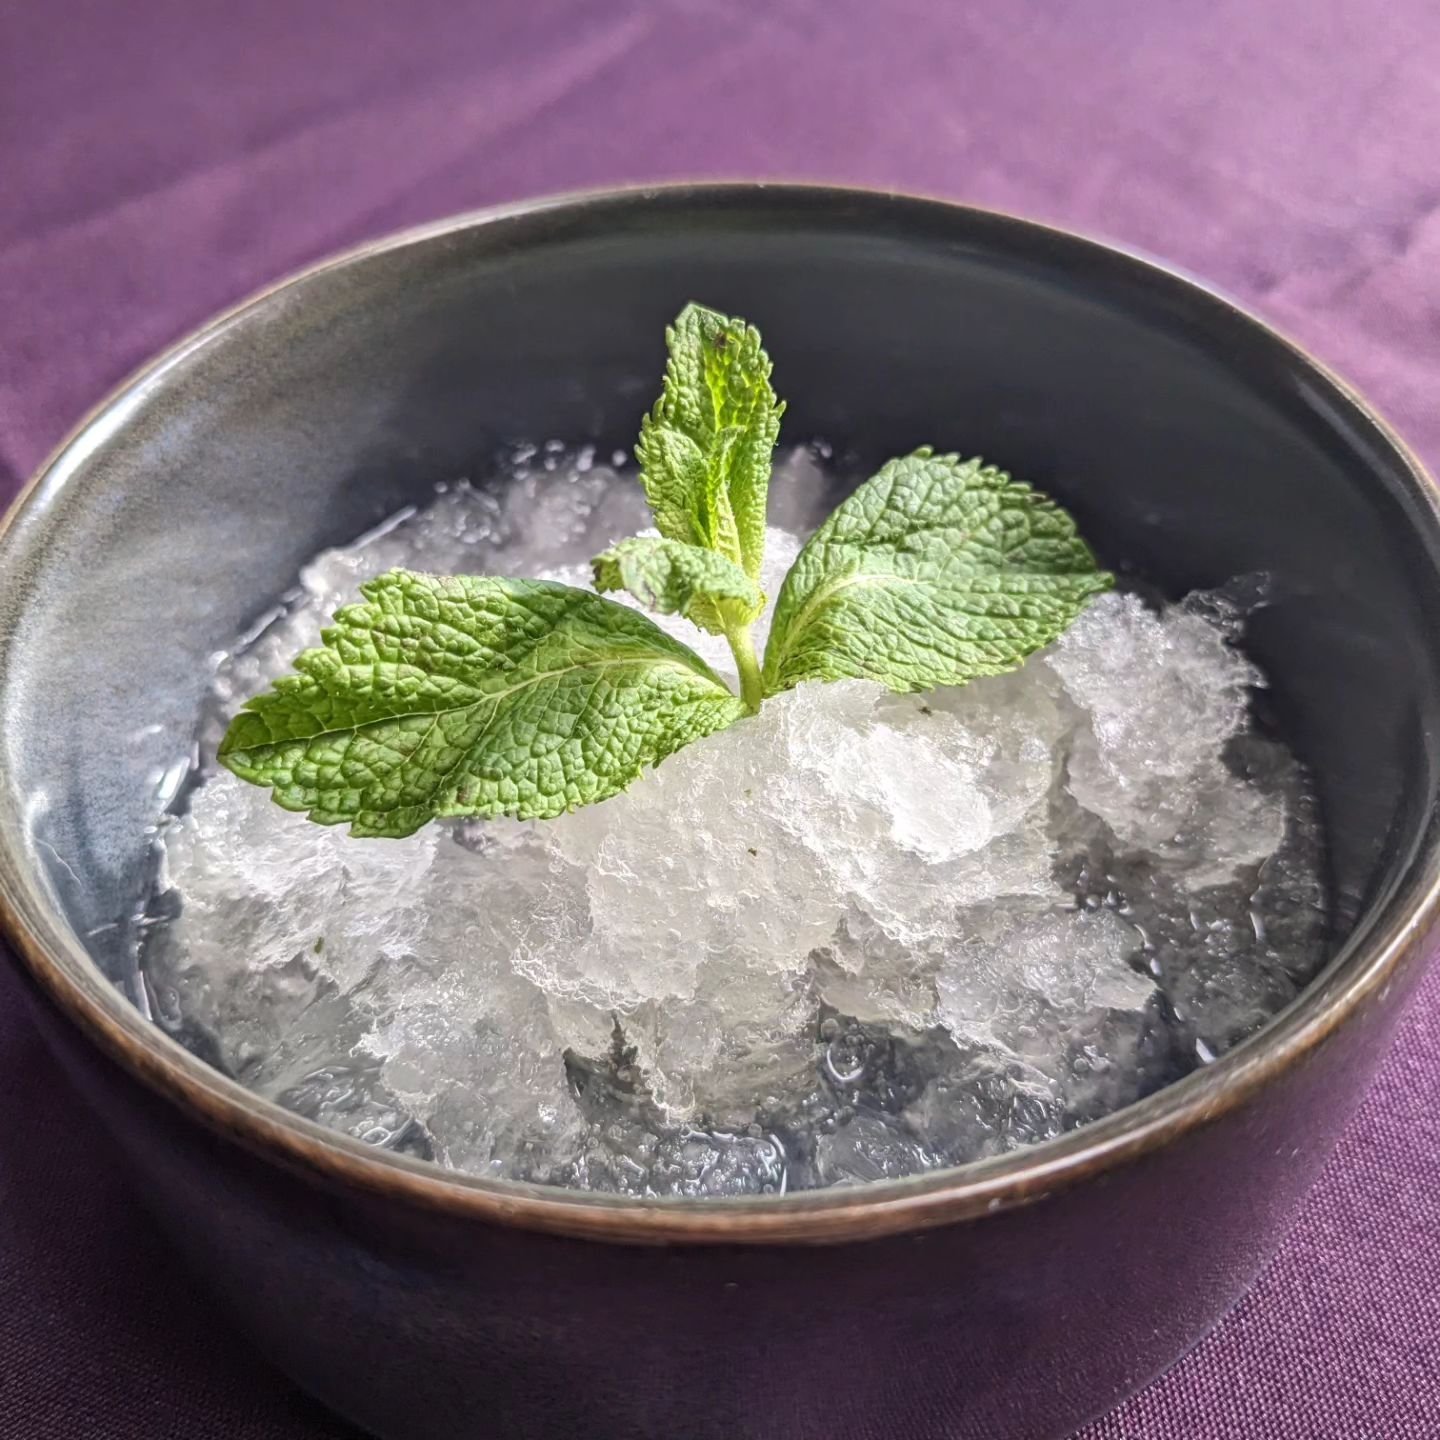 Next up is a little palate cleanser courtesy of the winter court. Gin and mint granita. Be warned it's sharp and boozy, but what else would you expect from the queen of air and darkness? Bright, invigorating with sharp defined flavours. Perfect encap